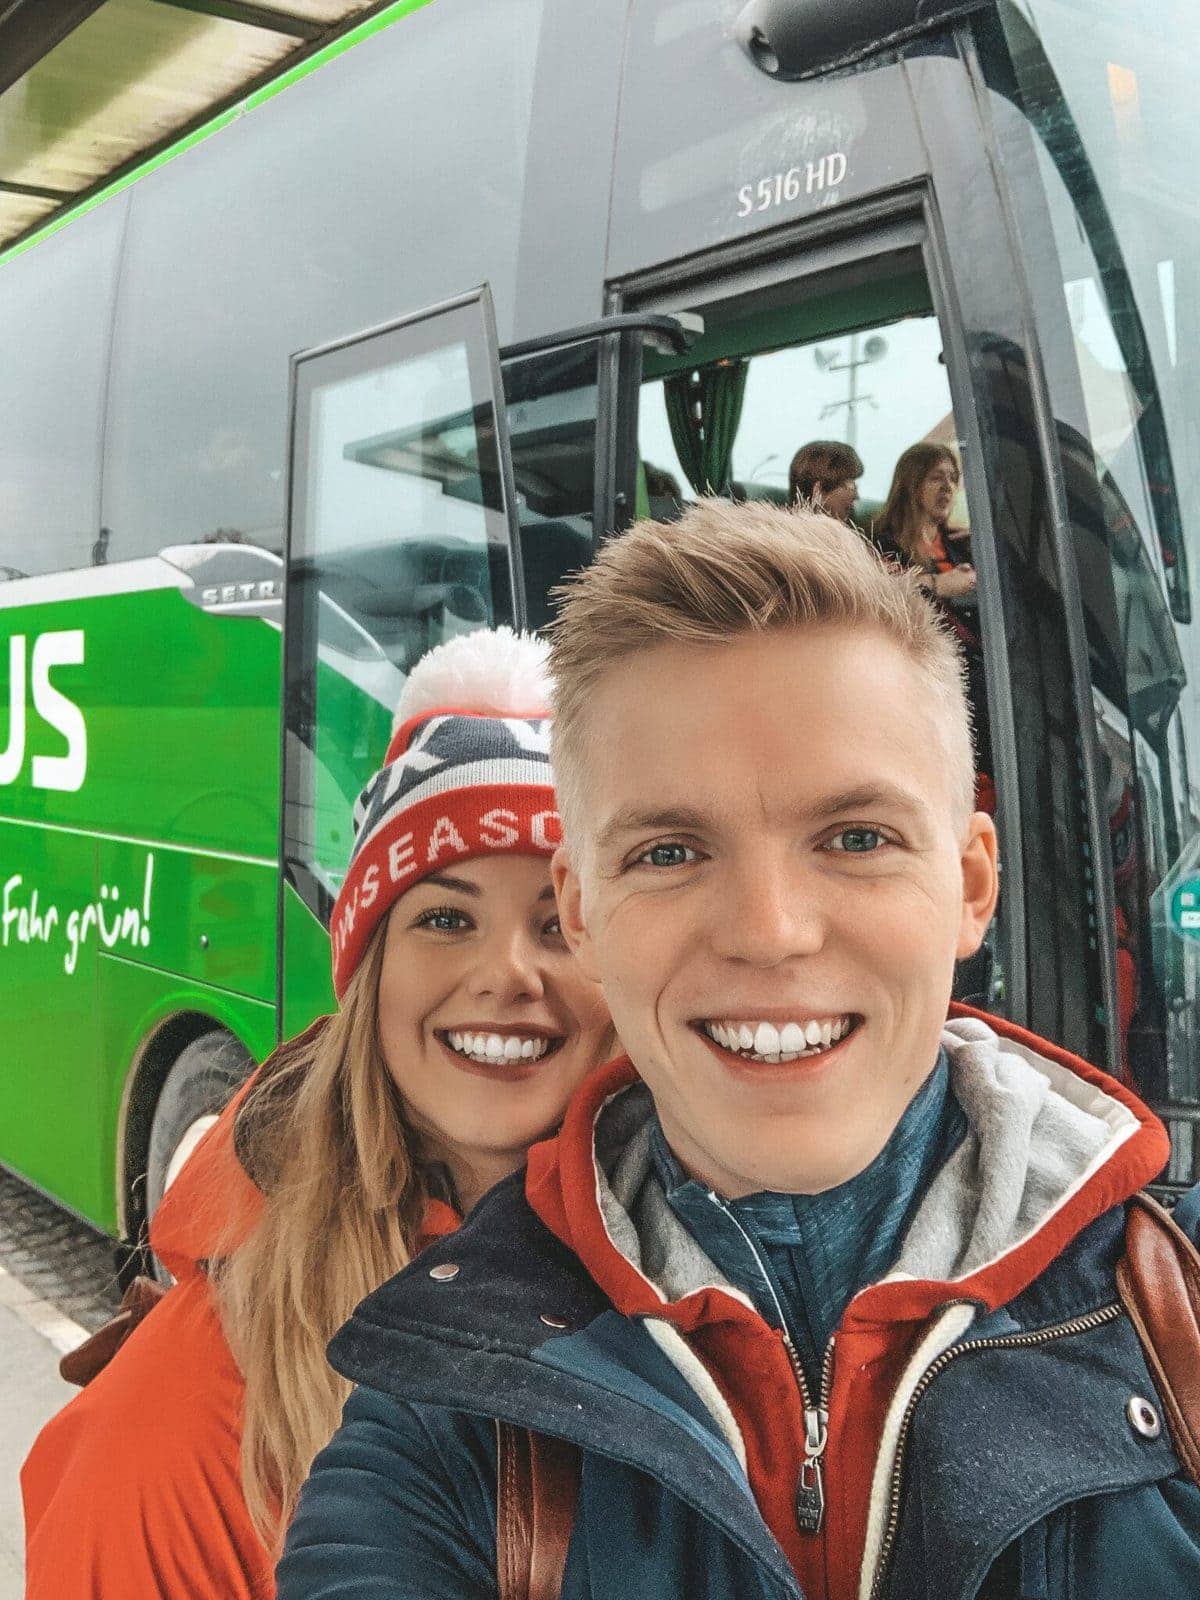 Lucka and Lukáš from Loudavým krokem with Flixbus in the background